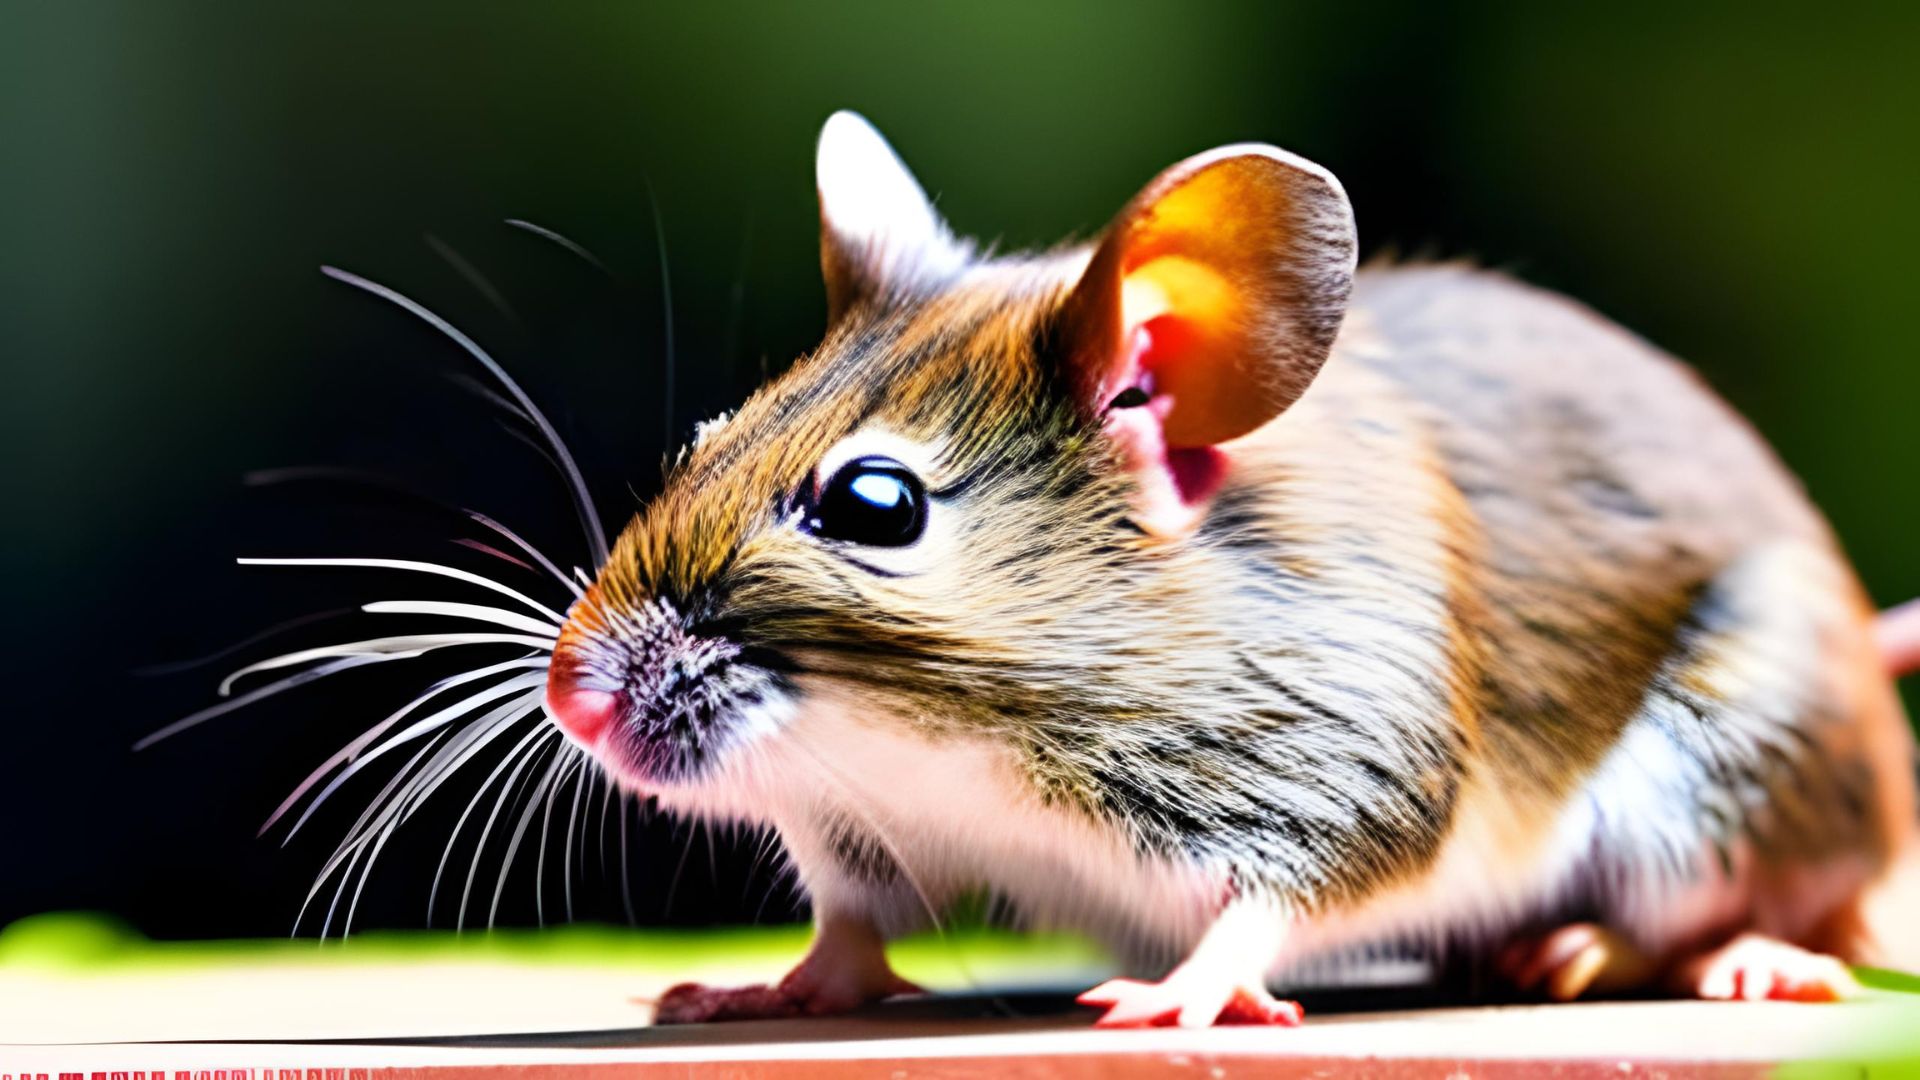 https://5d0bc7c2.rocketcdn.me/wp-content/uploads/2023/04/10-Effective-Ways-to-Keep-Mice-Out-of-Your-House.jpg